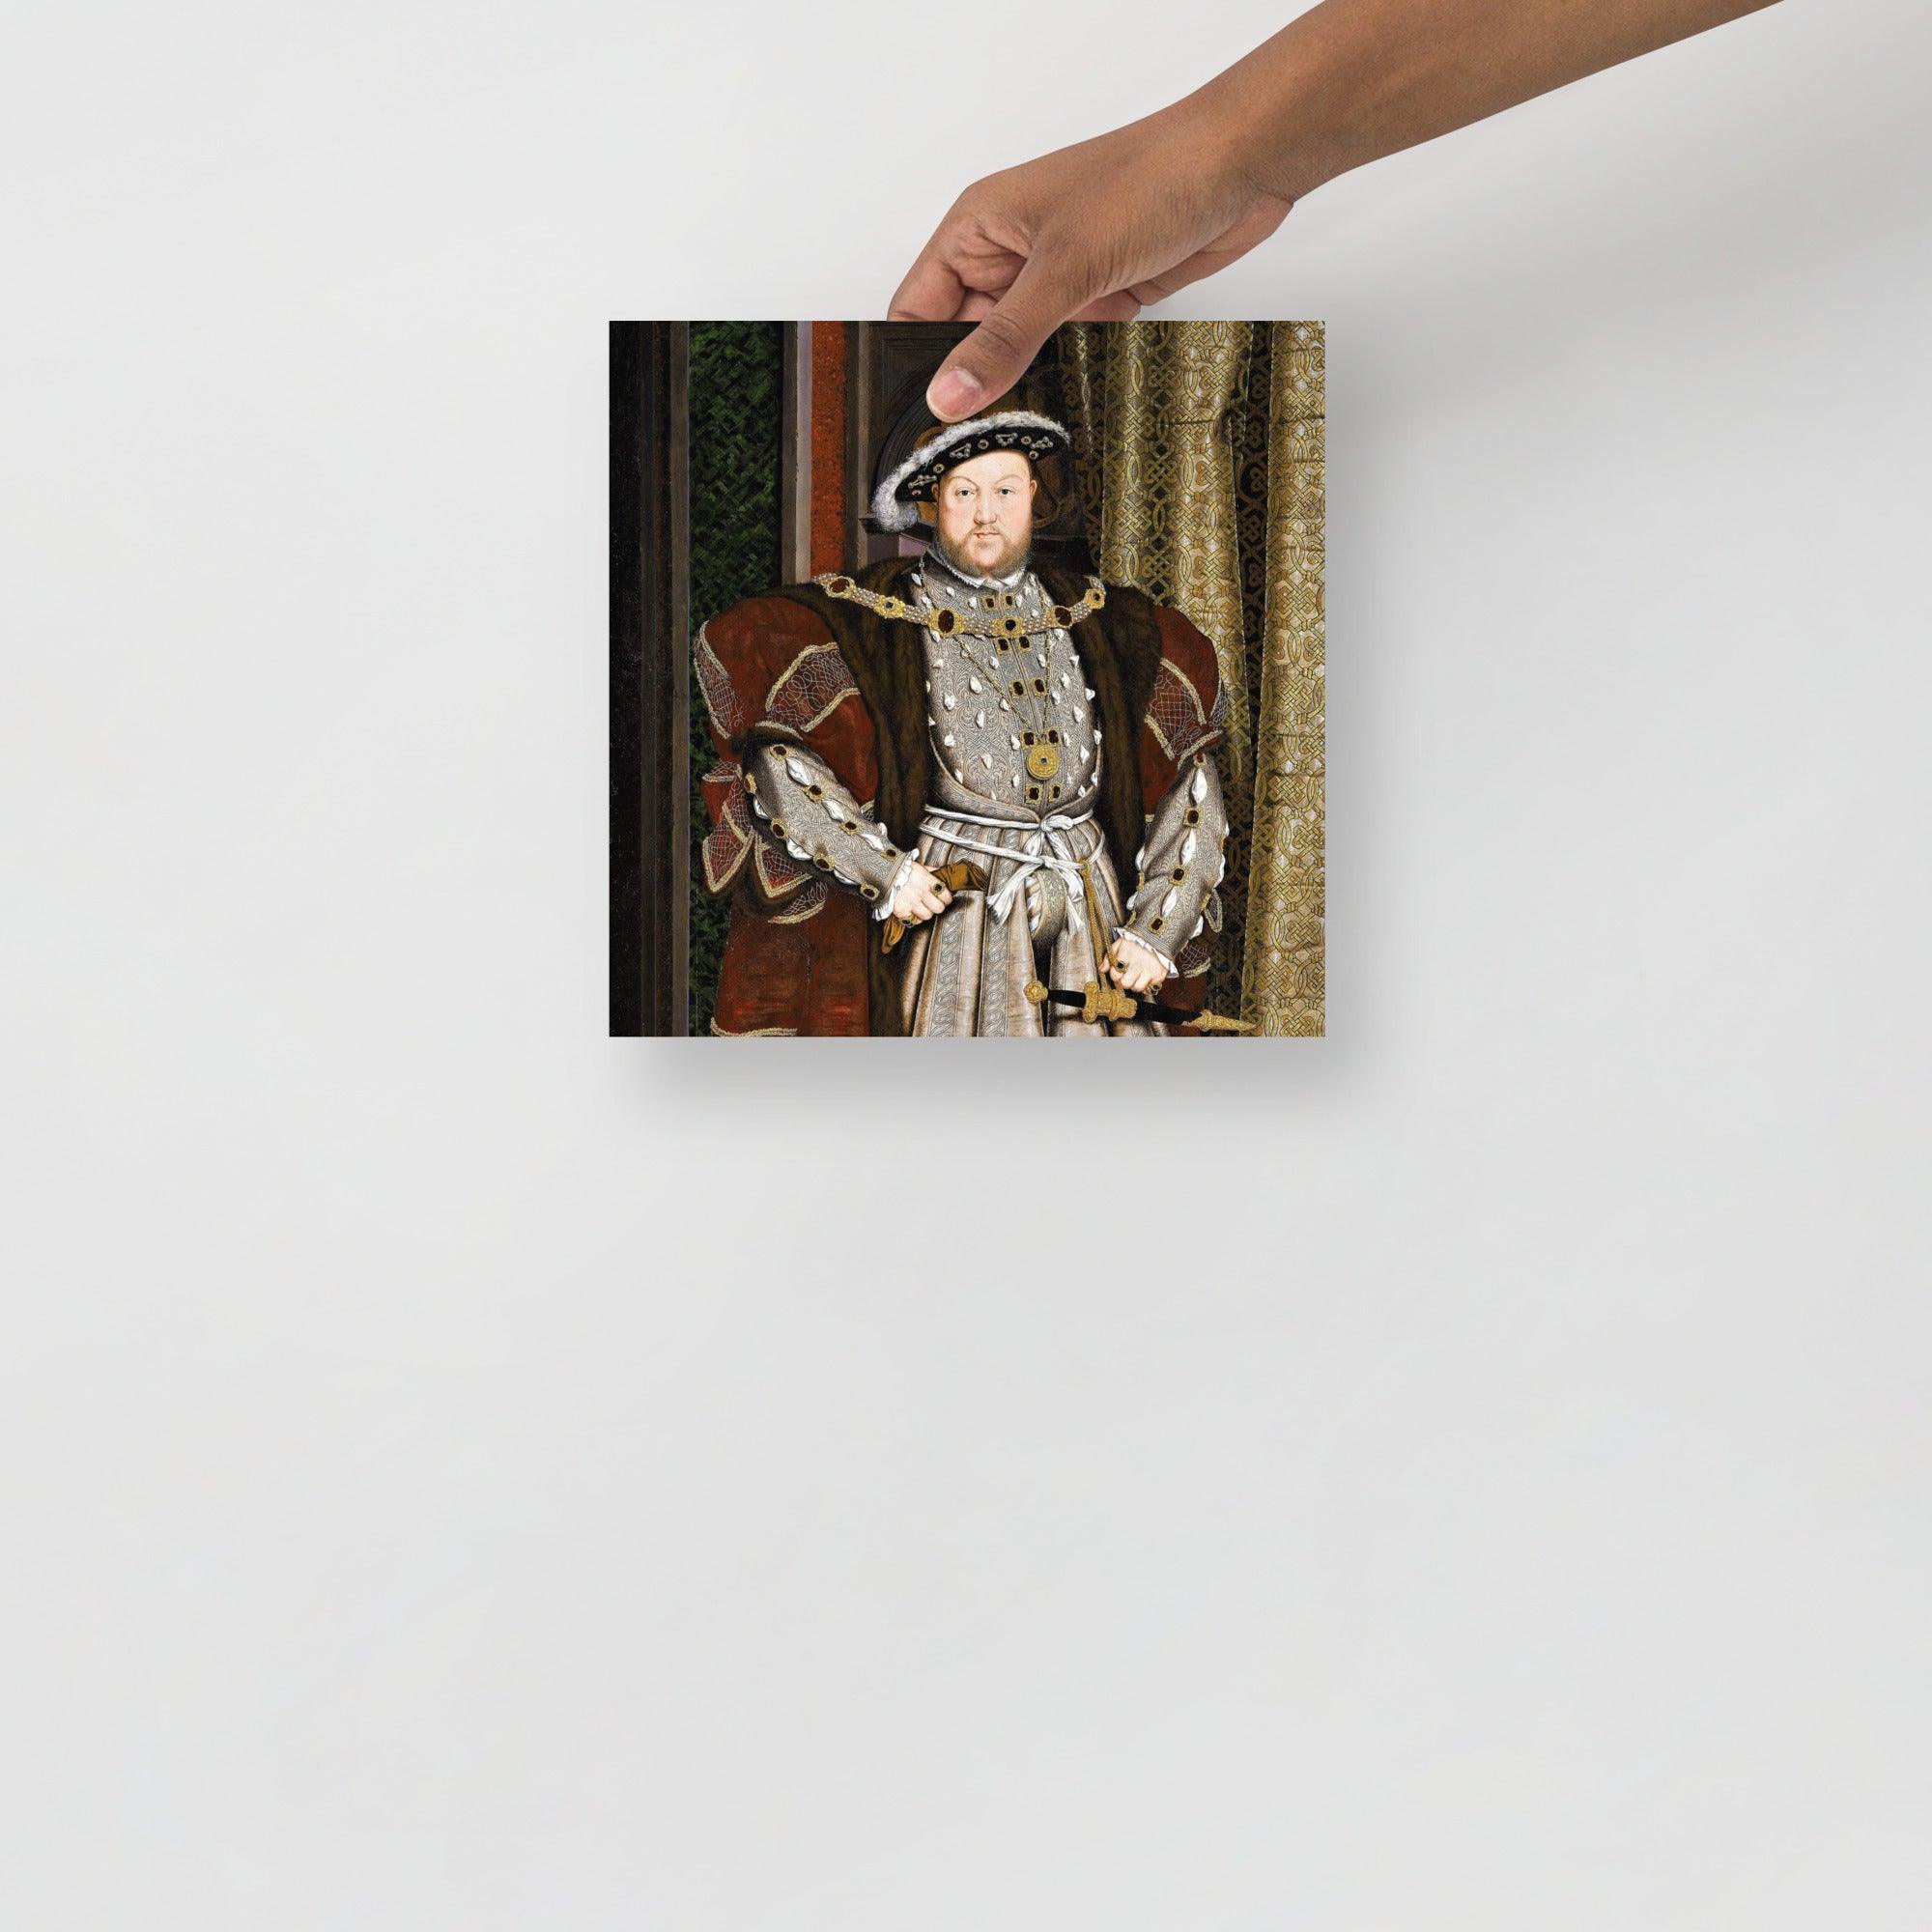 A Henry VIII Of England poster on a plain backdrop in size 10x10”.